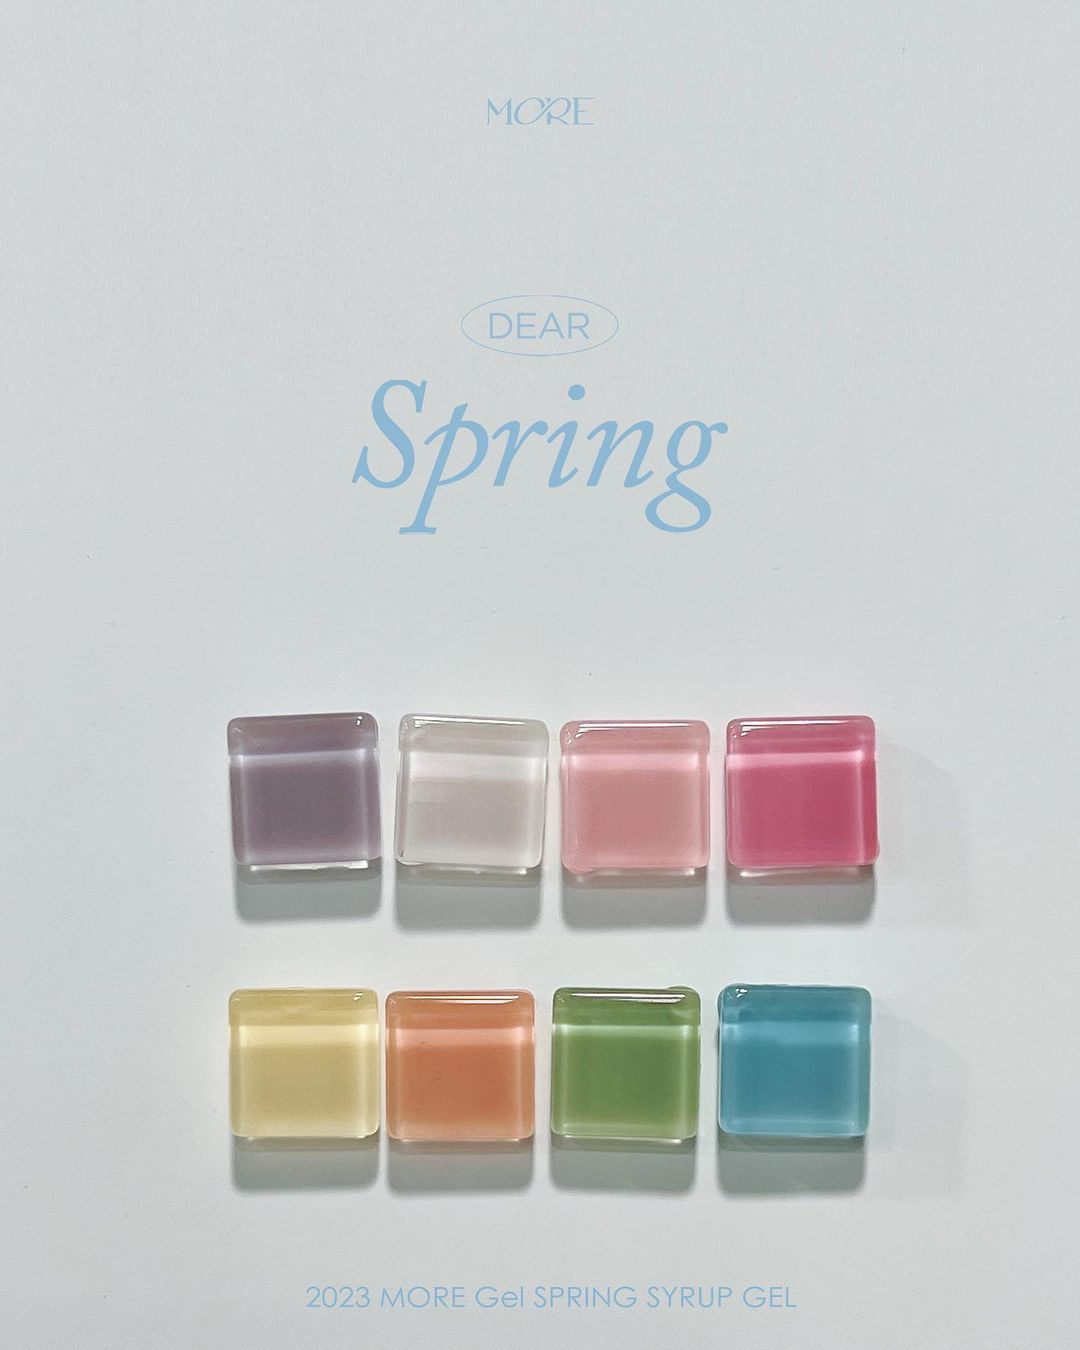 MORE GEL Dear spring 8pc syrup collection